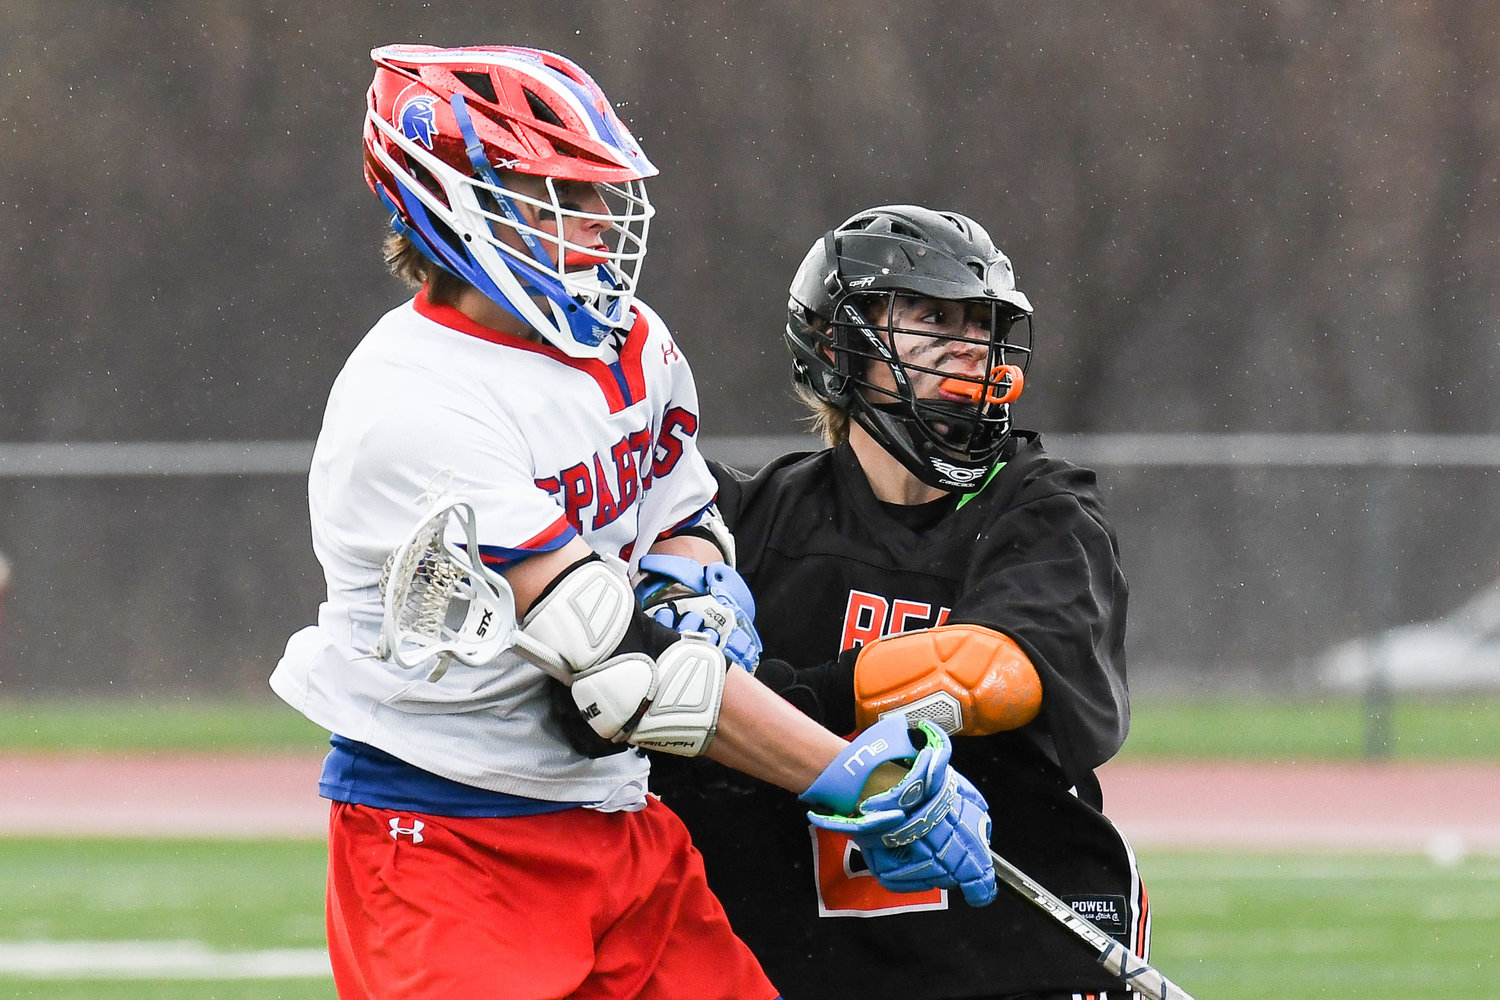 SCORING TOUCH — New Hartford's Gavin Williams, left, fires a shot against Rome Free Academy defender Kaden Elliott during a lacrosse game on Thursday at New Hartford. The Spartans won 17-4. Williams had two goals and an assist.